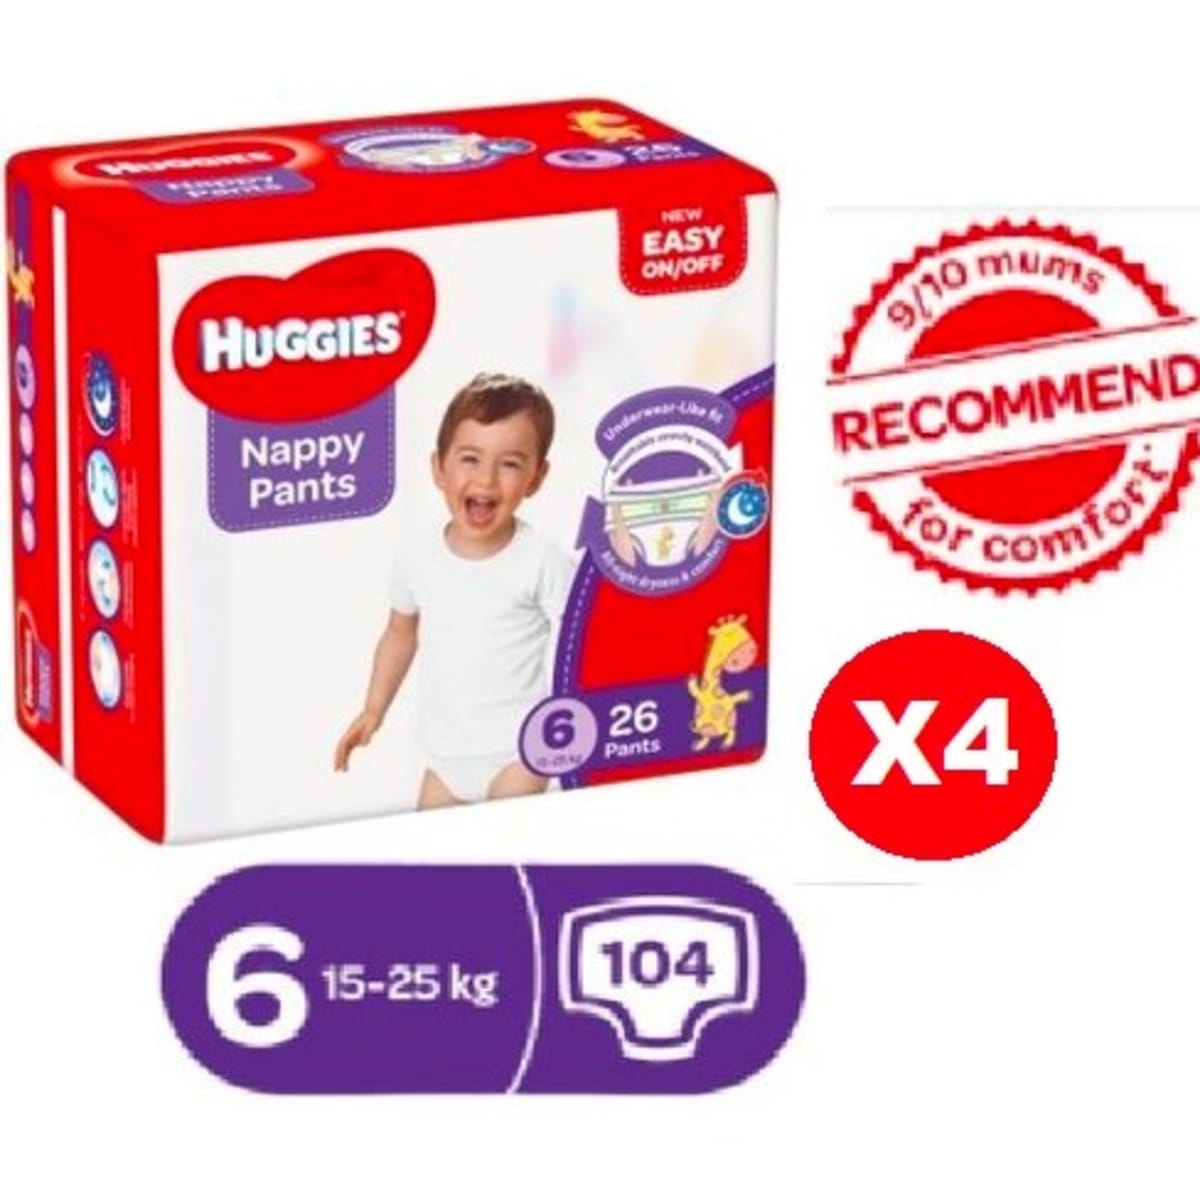 Huggies Complete Comfort Wonder Pants, Small (S) Size Baby Diaper Pants,  Combo Pack of 2, 86 count Per Pack, (172 count) with 5 in 1 Comfort Rs.  1399 - Amazon